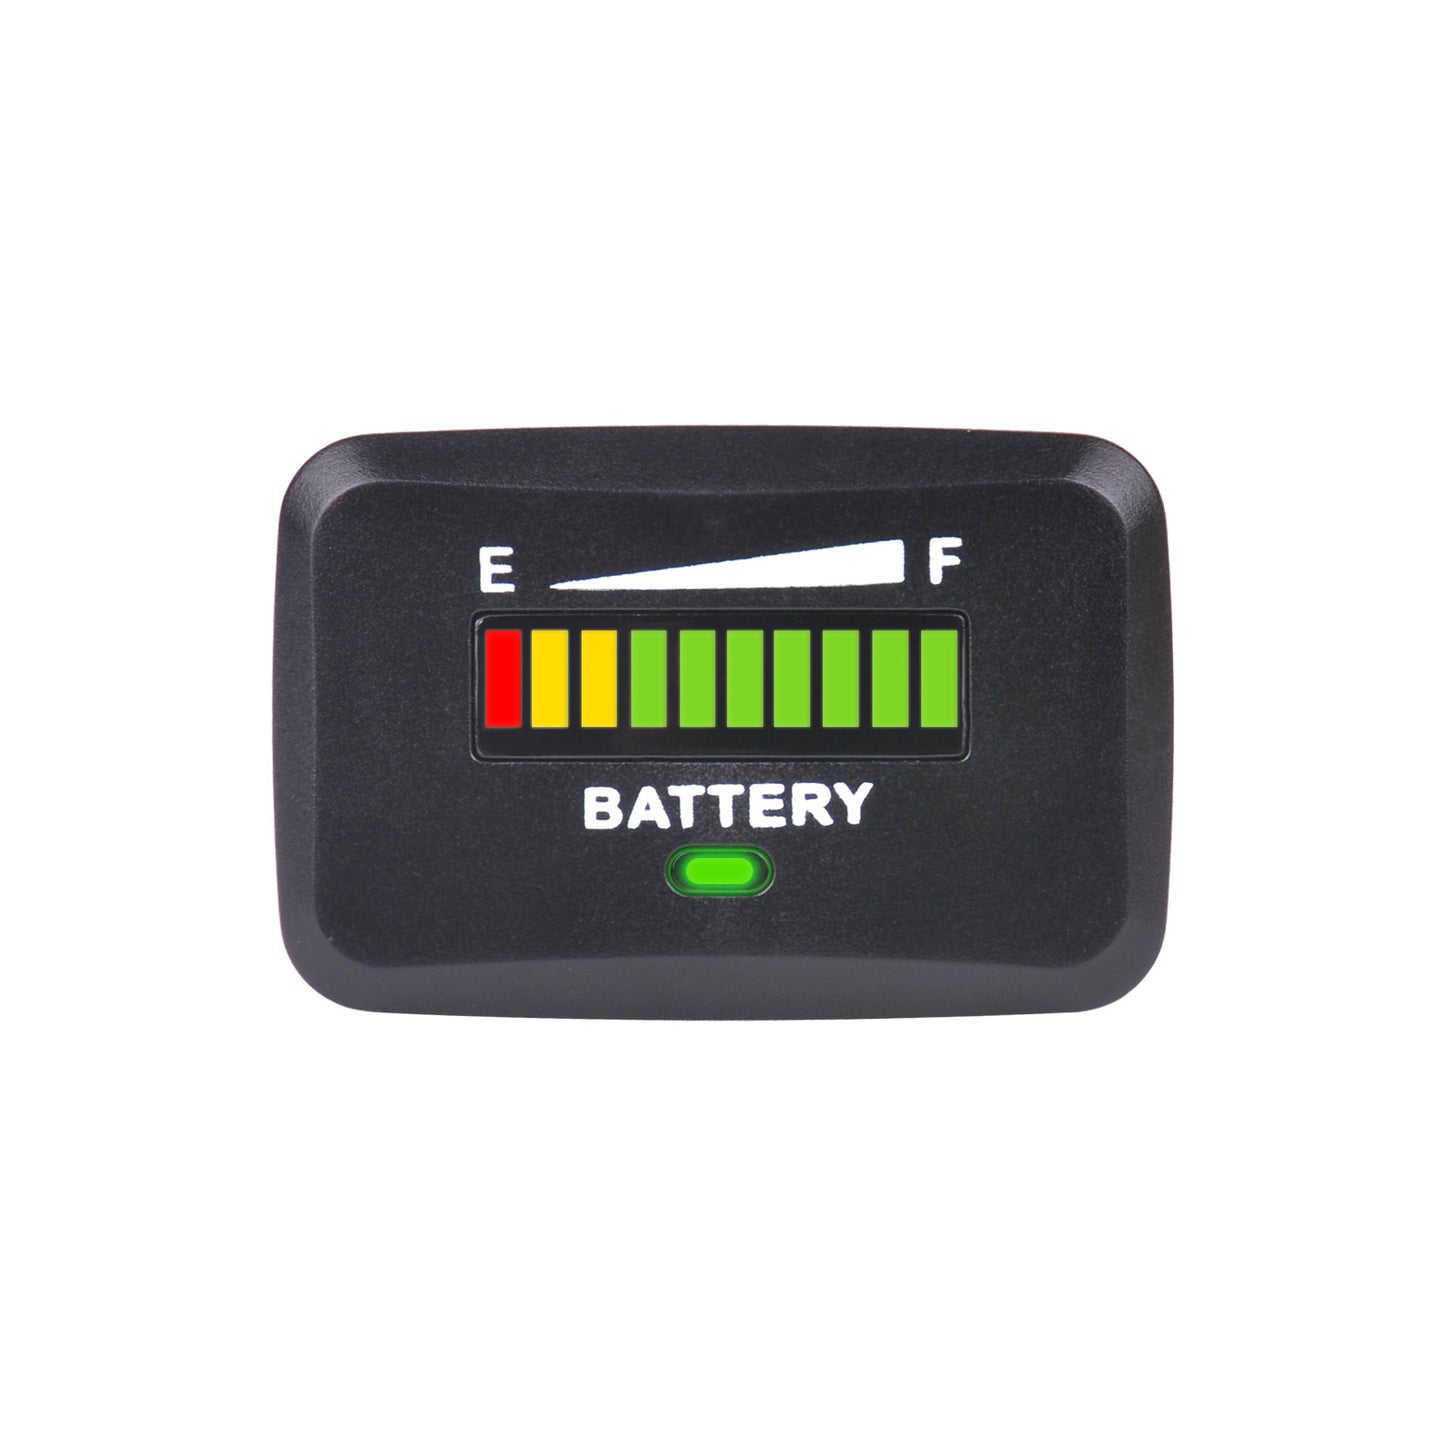 Runleader 12V to 24V LED Battery Capacity Meter Battery Level Meter Monitor of Battery Charge & Discharge Various Batteries Applicably Snap-in Mount